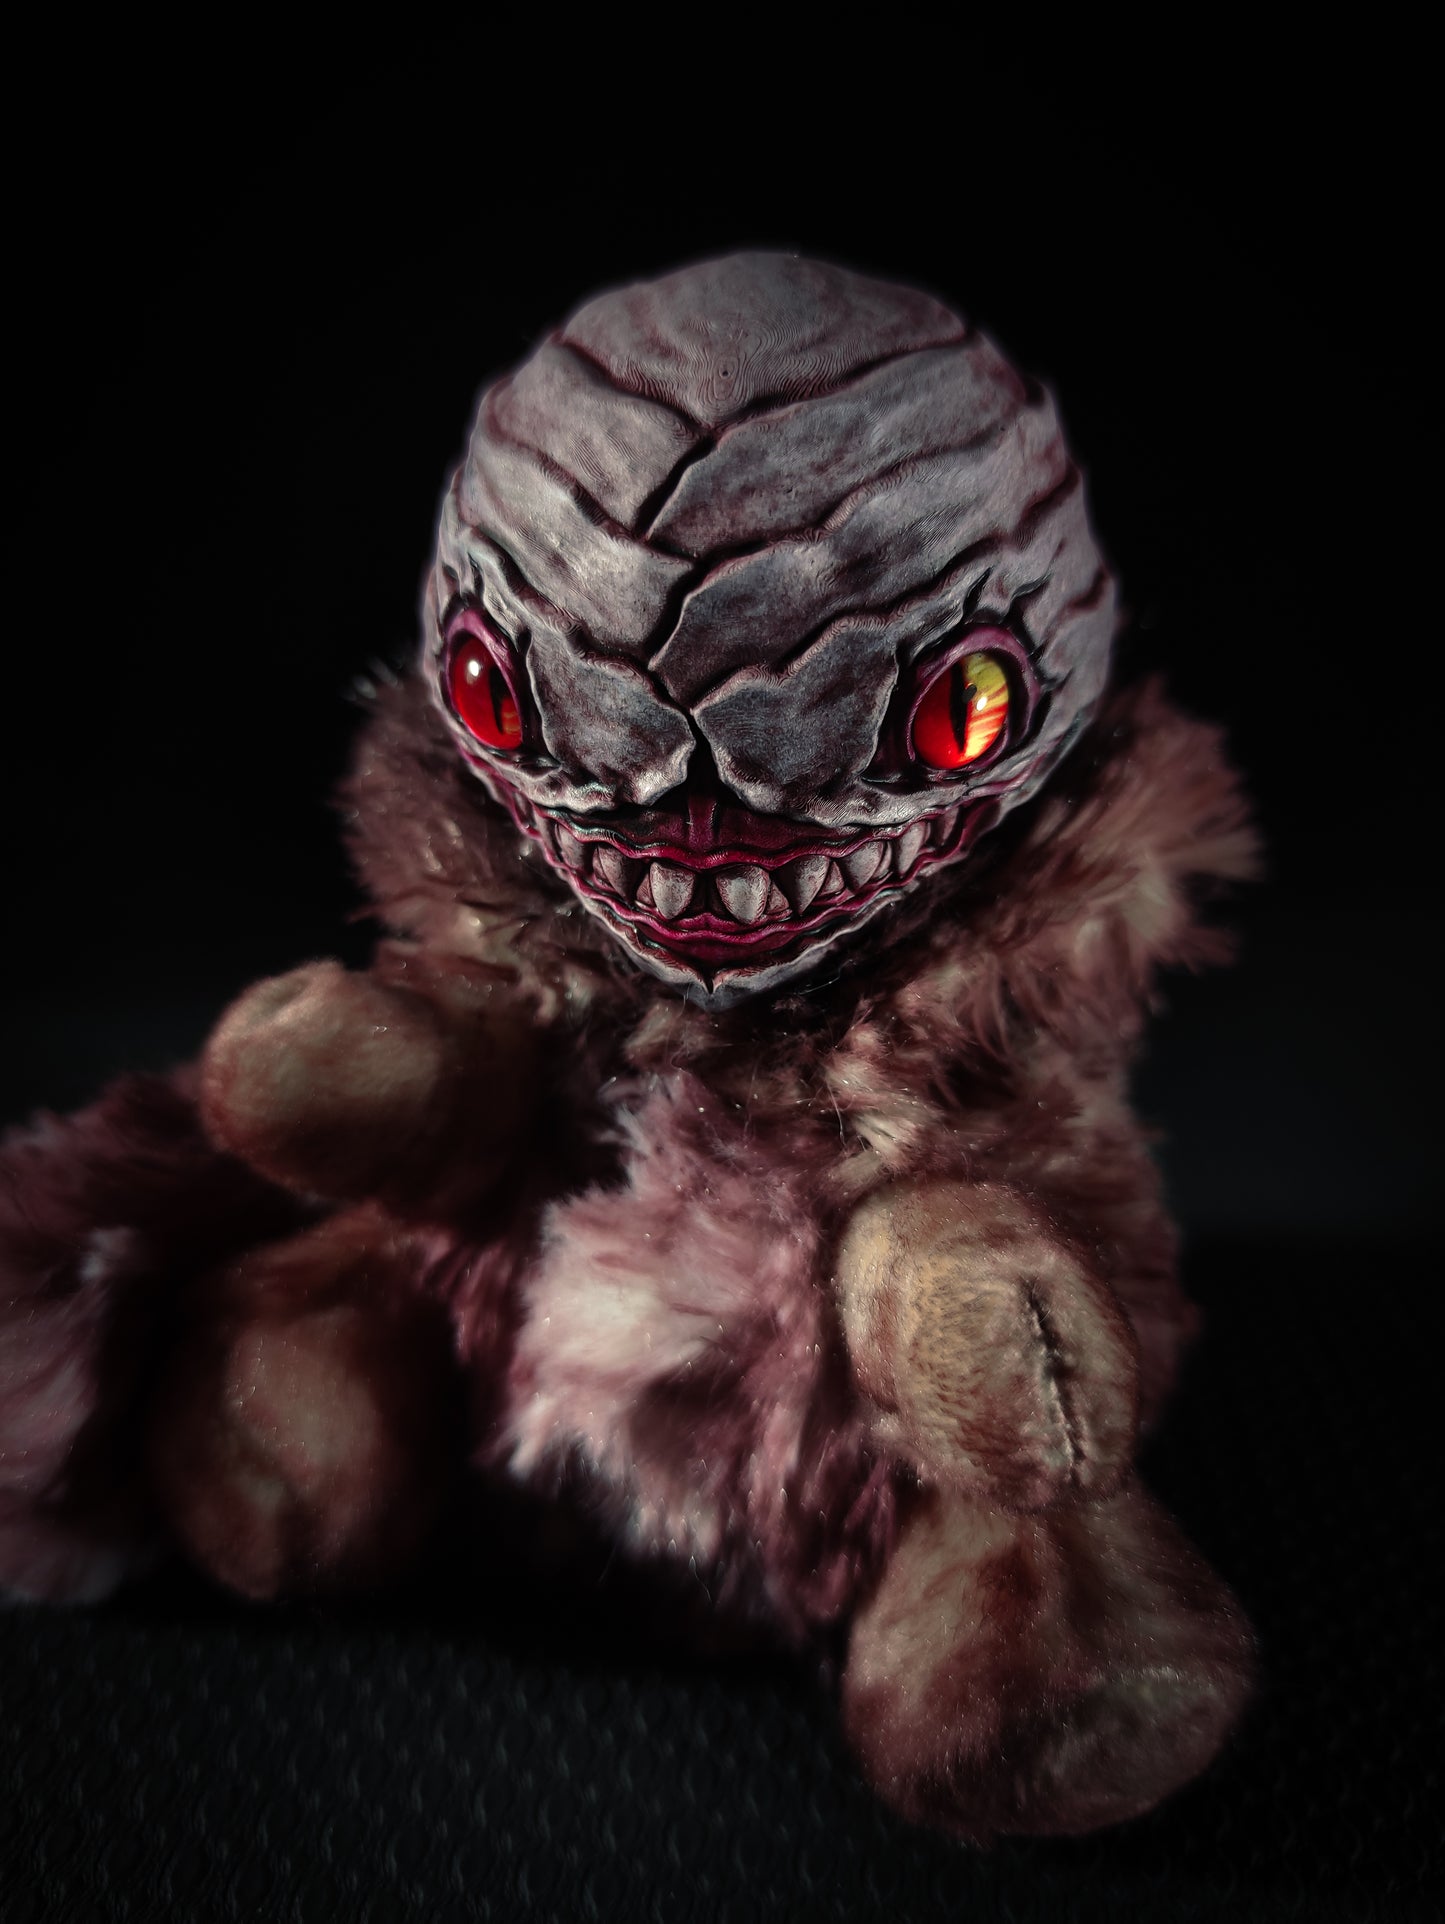 Hisao - FREAPERS Cryptid Art Doll Plush Toy